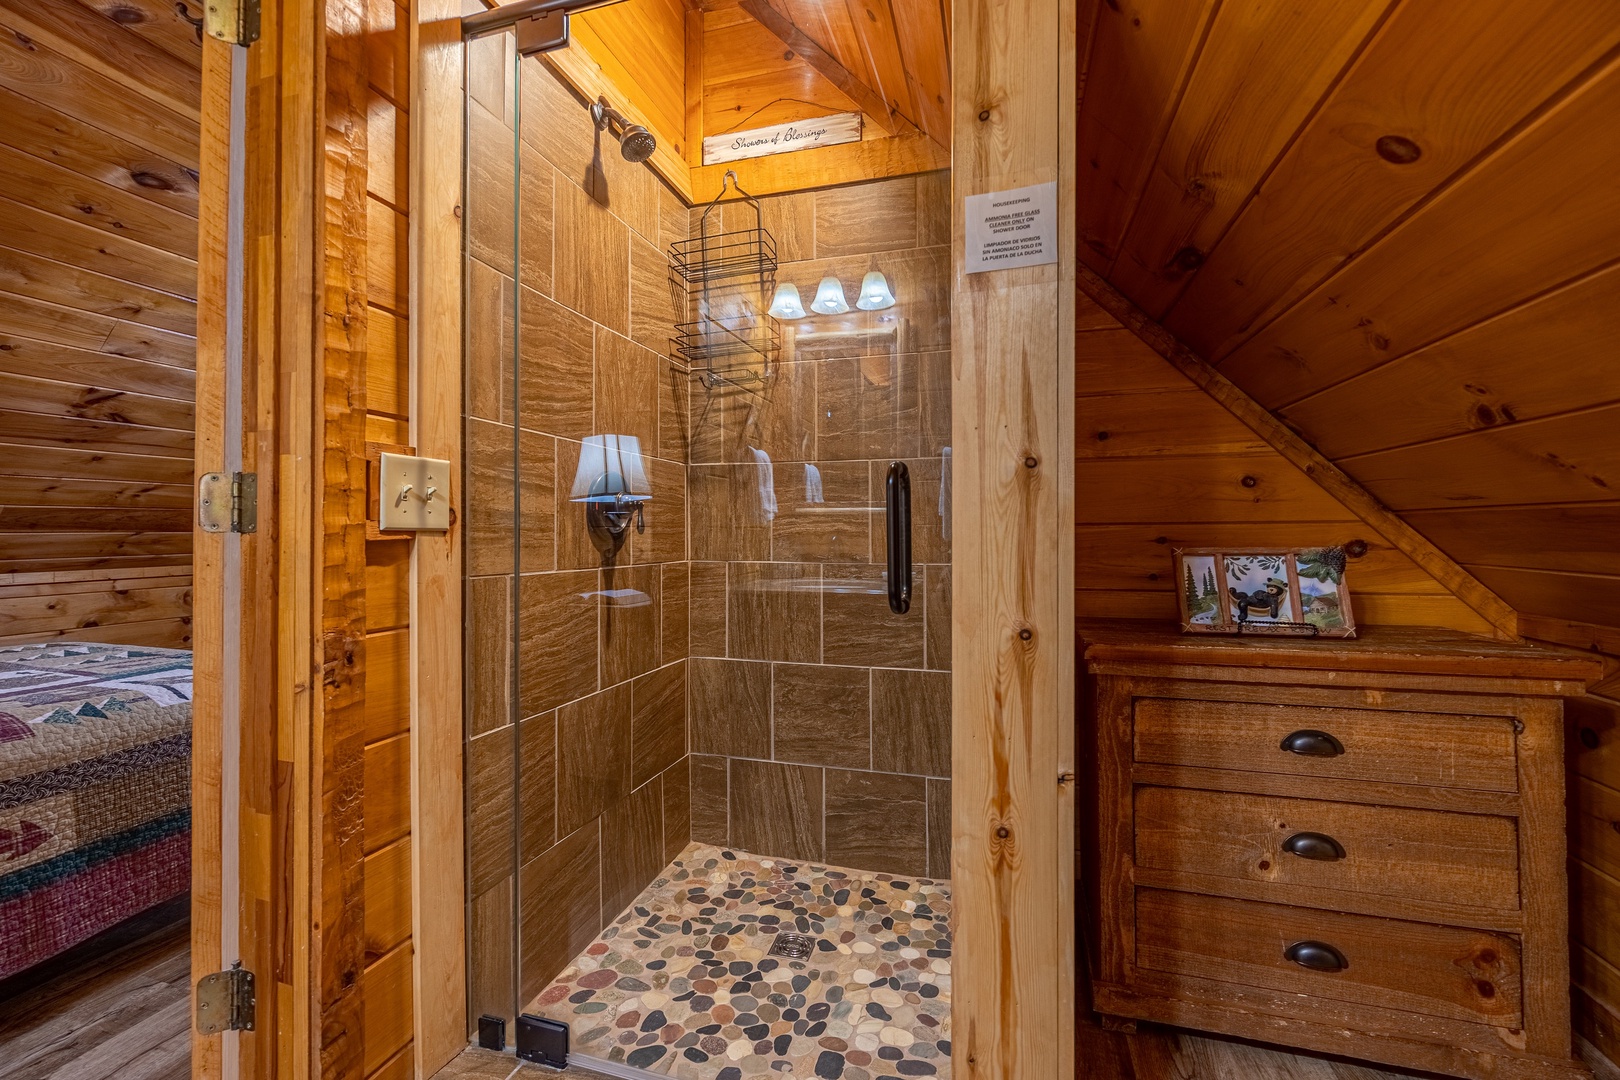 Shower at Cabin On The Hill, a 1 bedroom cabin rental located in Pigeon Forge